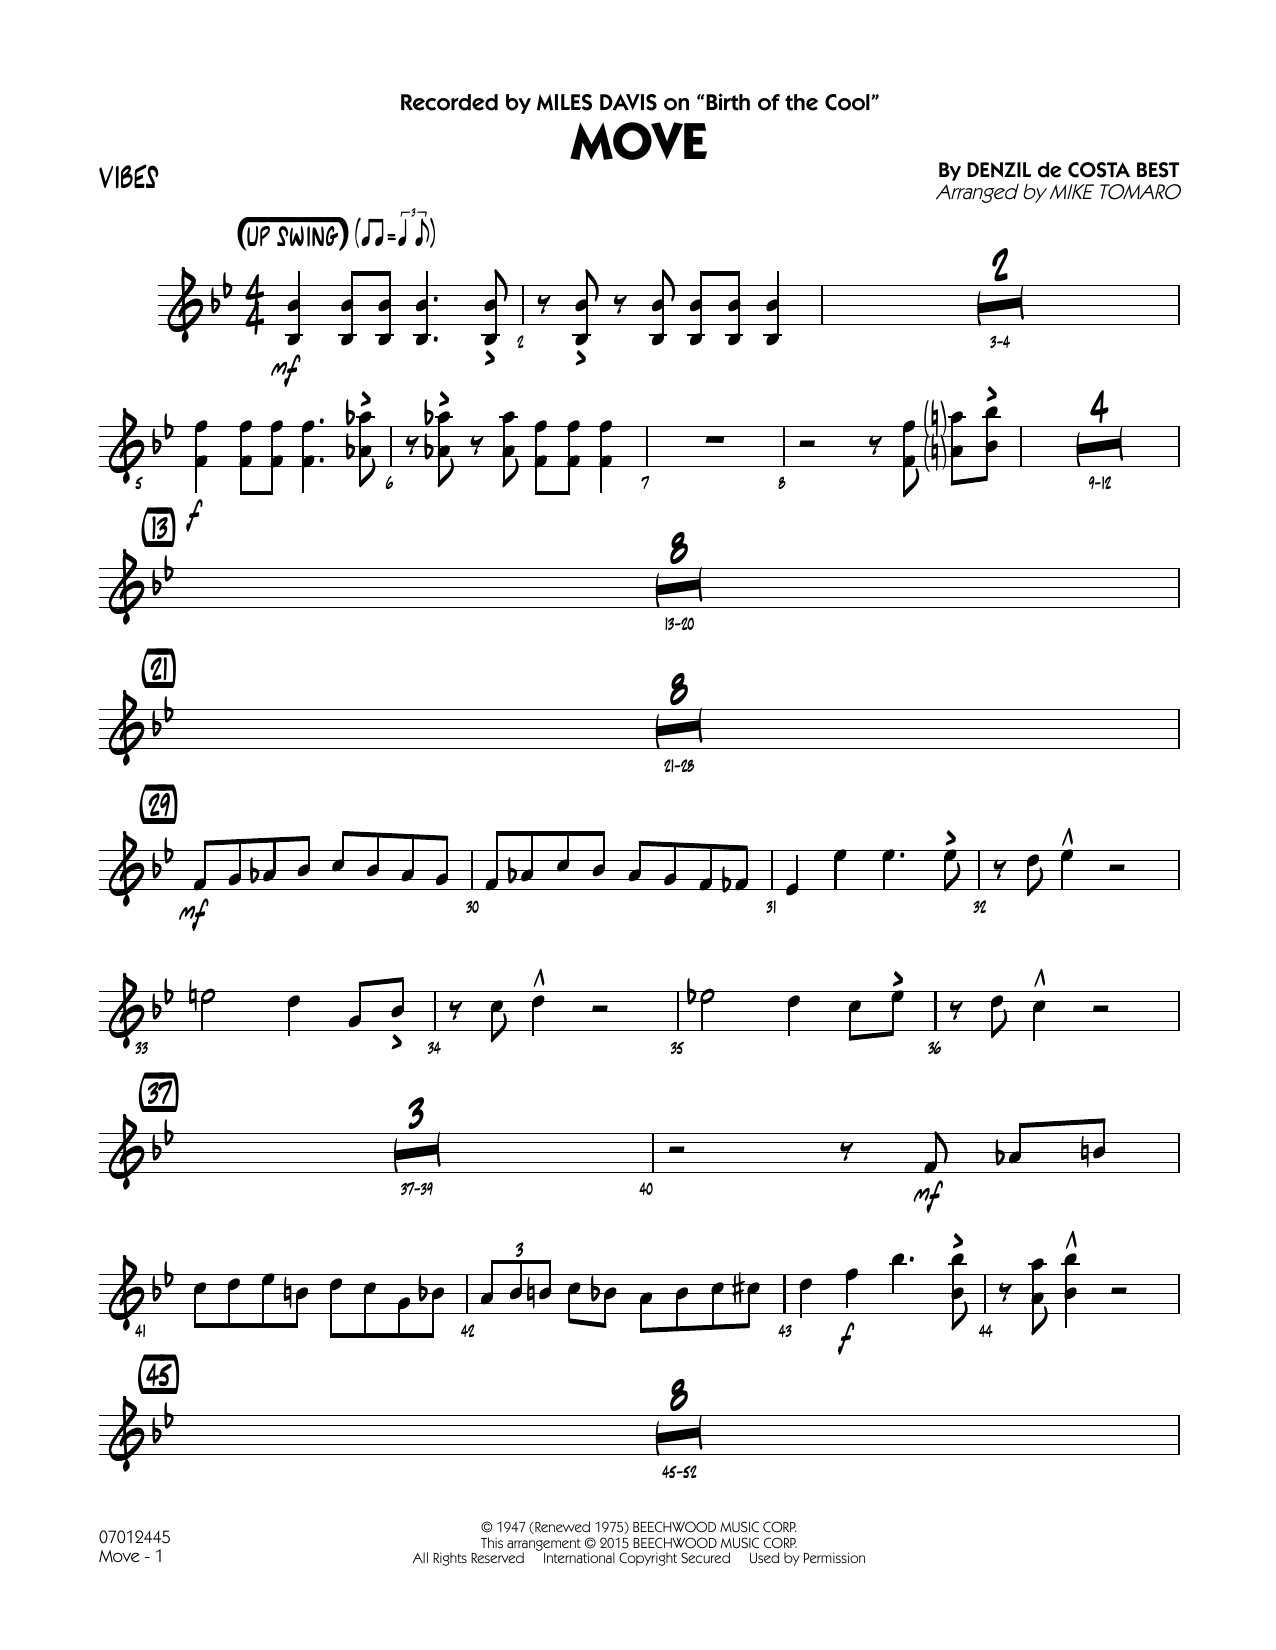 Mike Tomaro Move - Vibes sheet music notes and chords. Download Printable PDF.